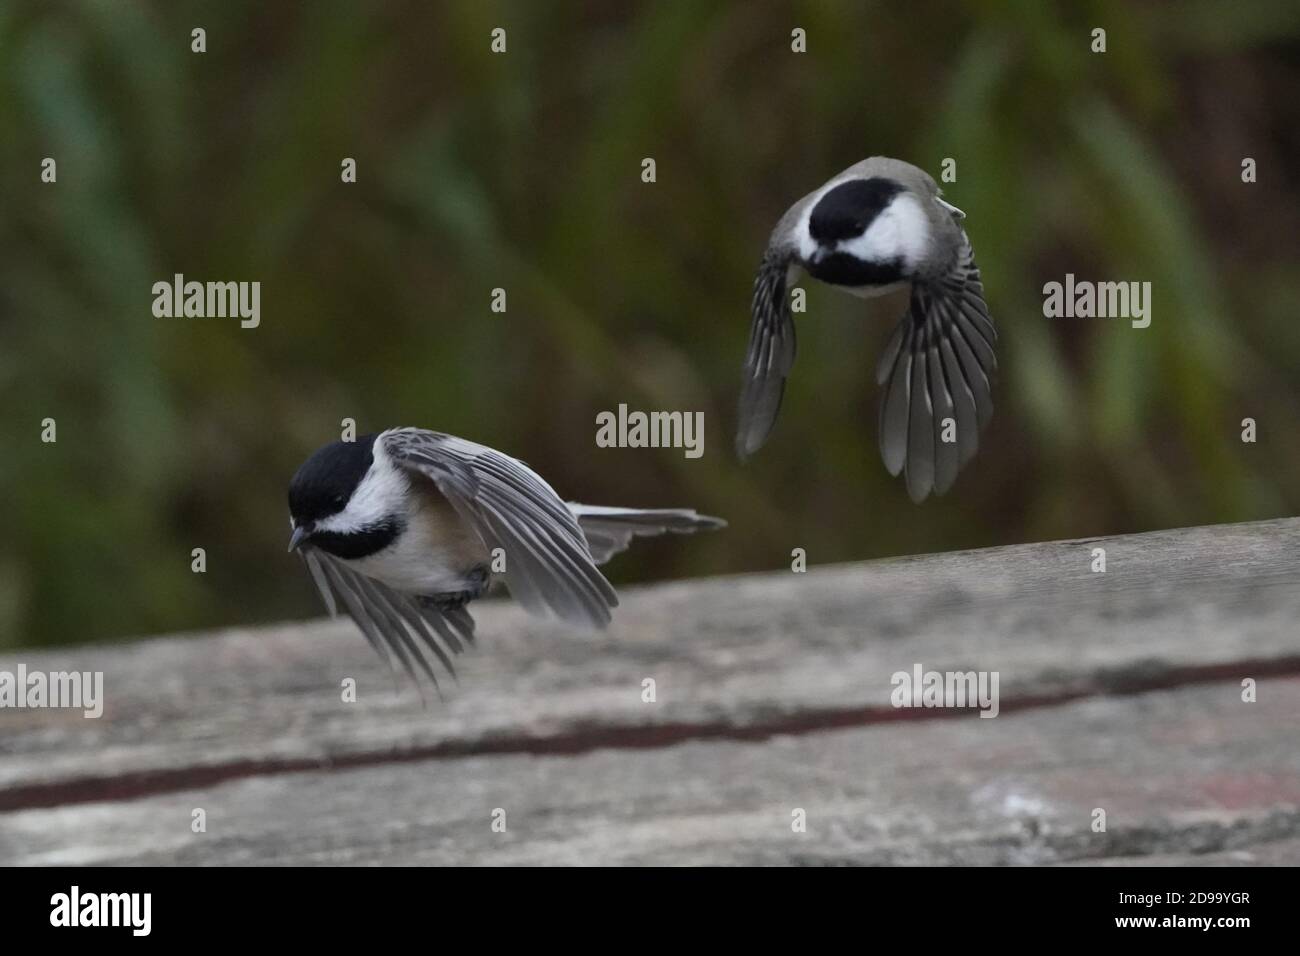 Chickadees and nuthatches fed by hand Stock Photo